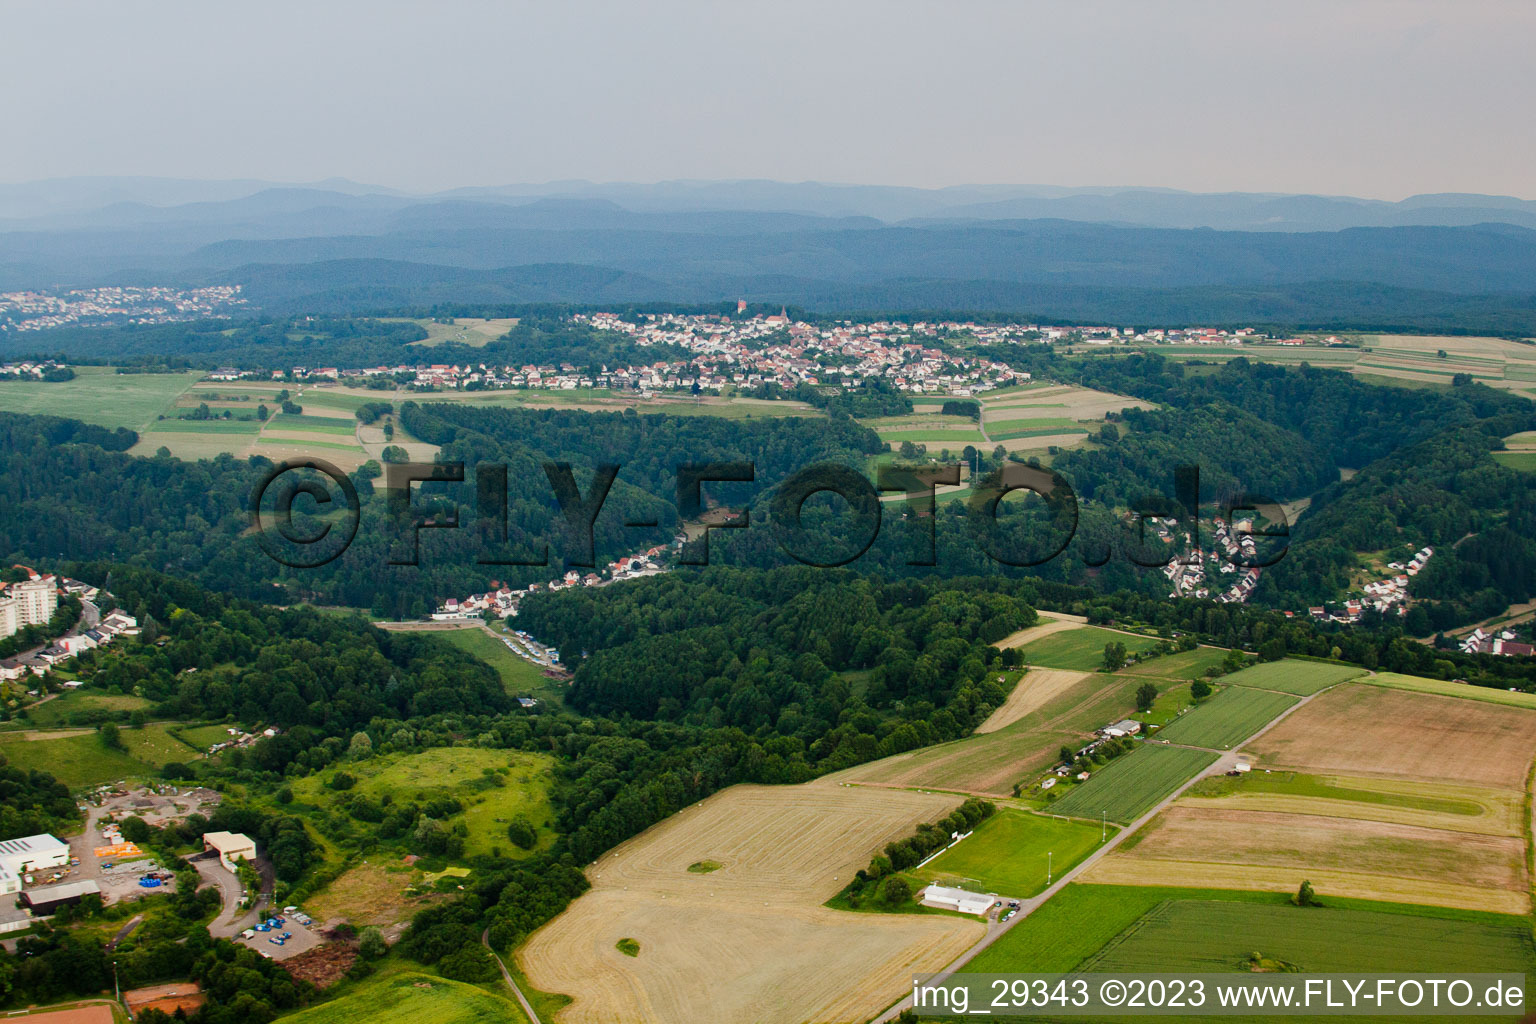 Erlenbrunn in the state Rhineland-Palatinate, Germany from above